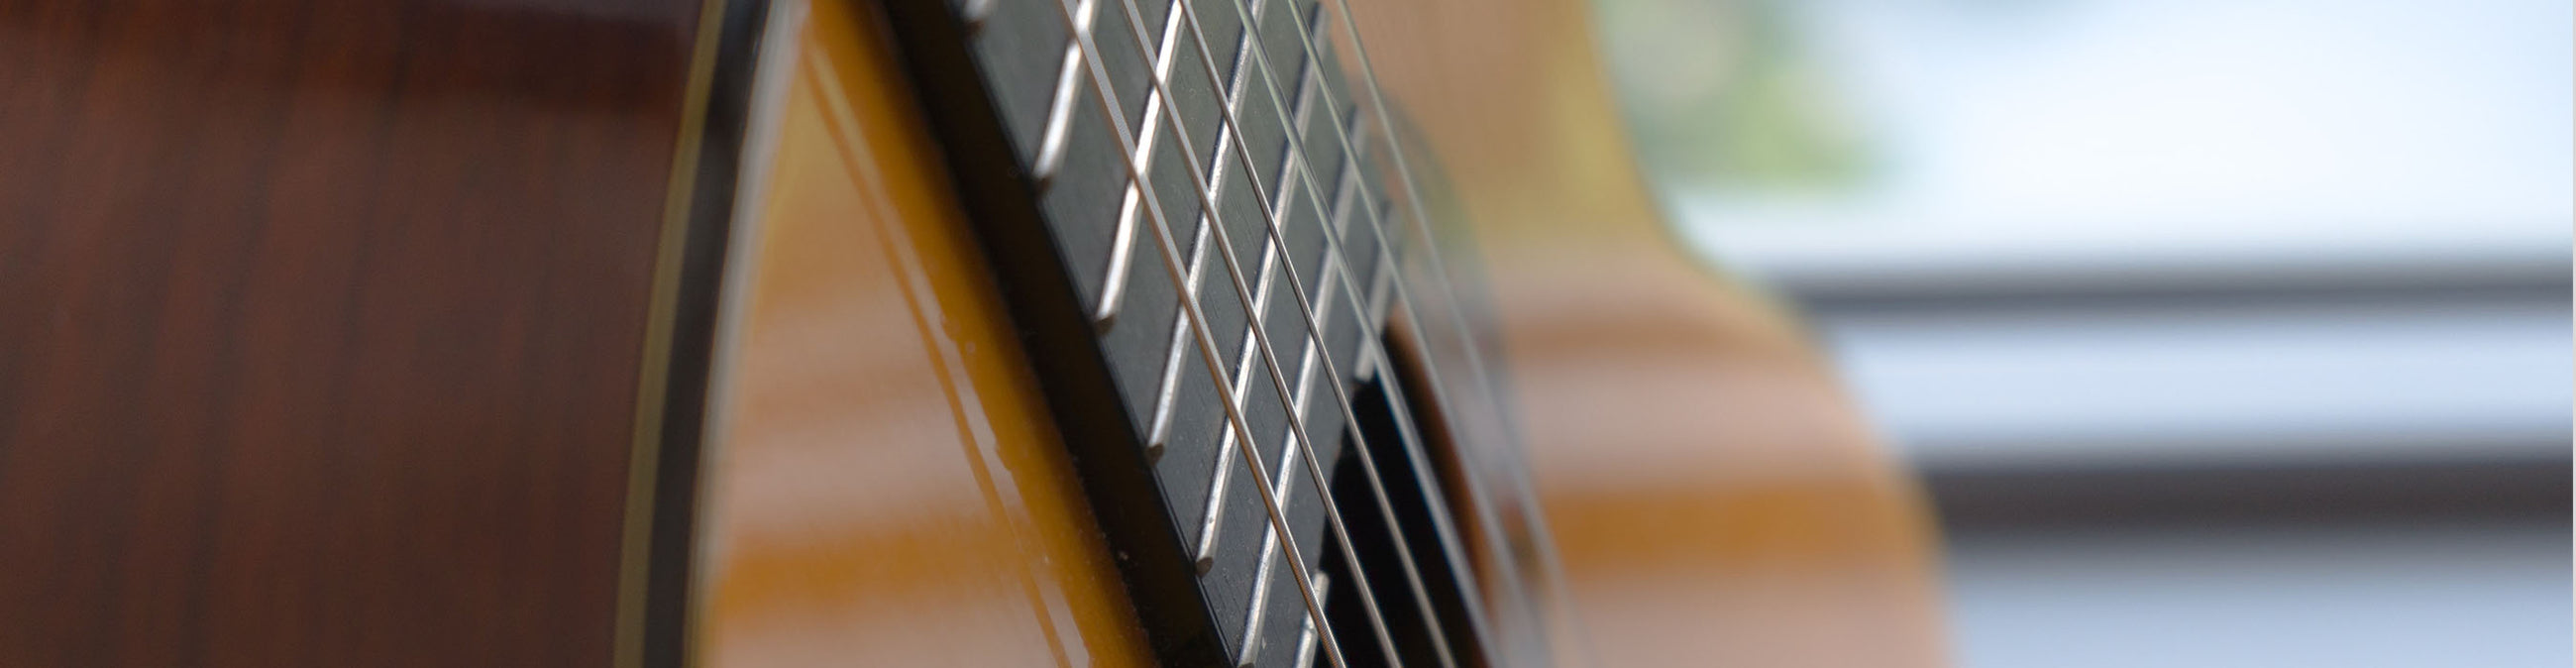 Close up photo of a classical guitar with nylon guitar strings